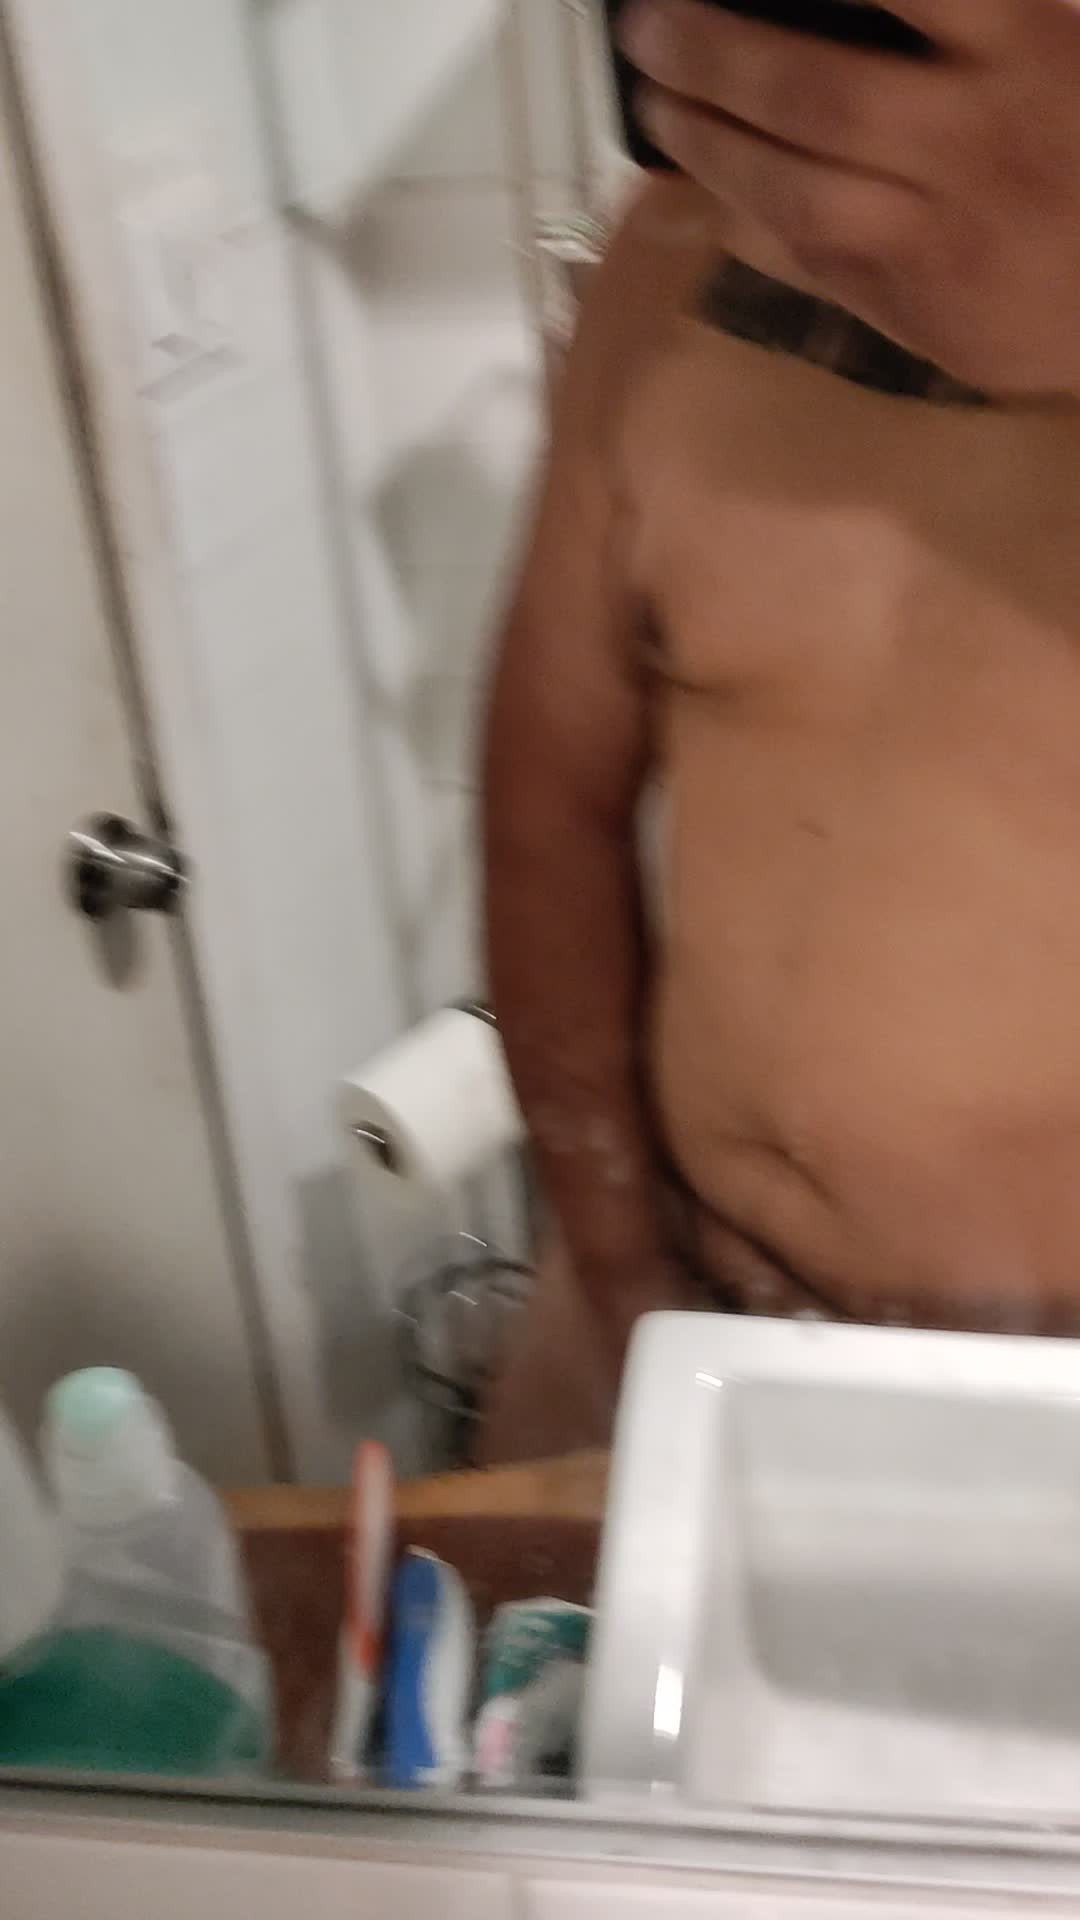 Video by Aang951 with the username @Aang951, posted on June 17, 2021. The post is about the topic Penis and the text says '#cock'